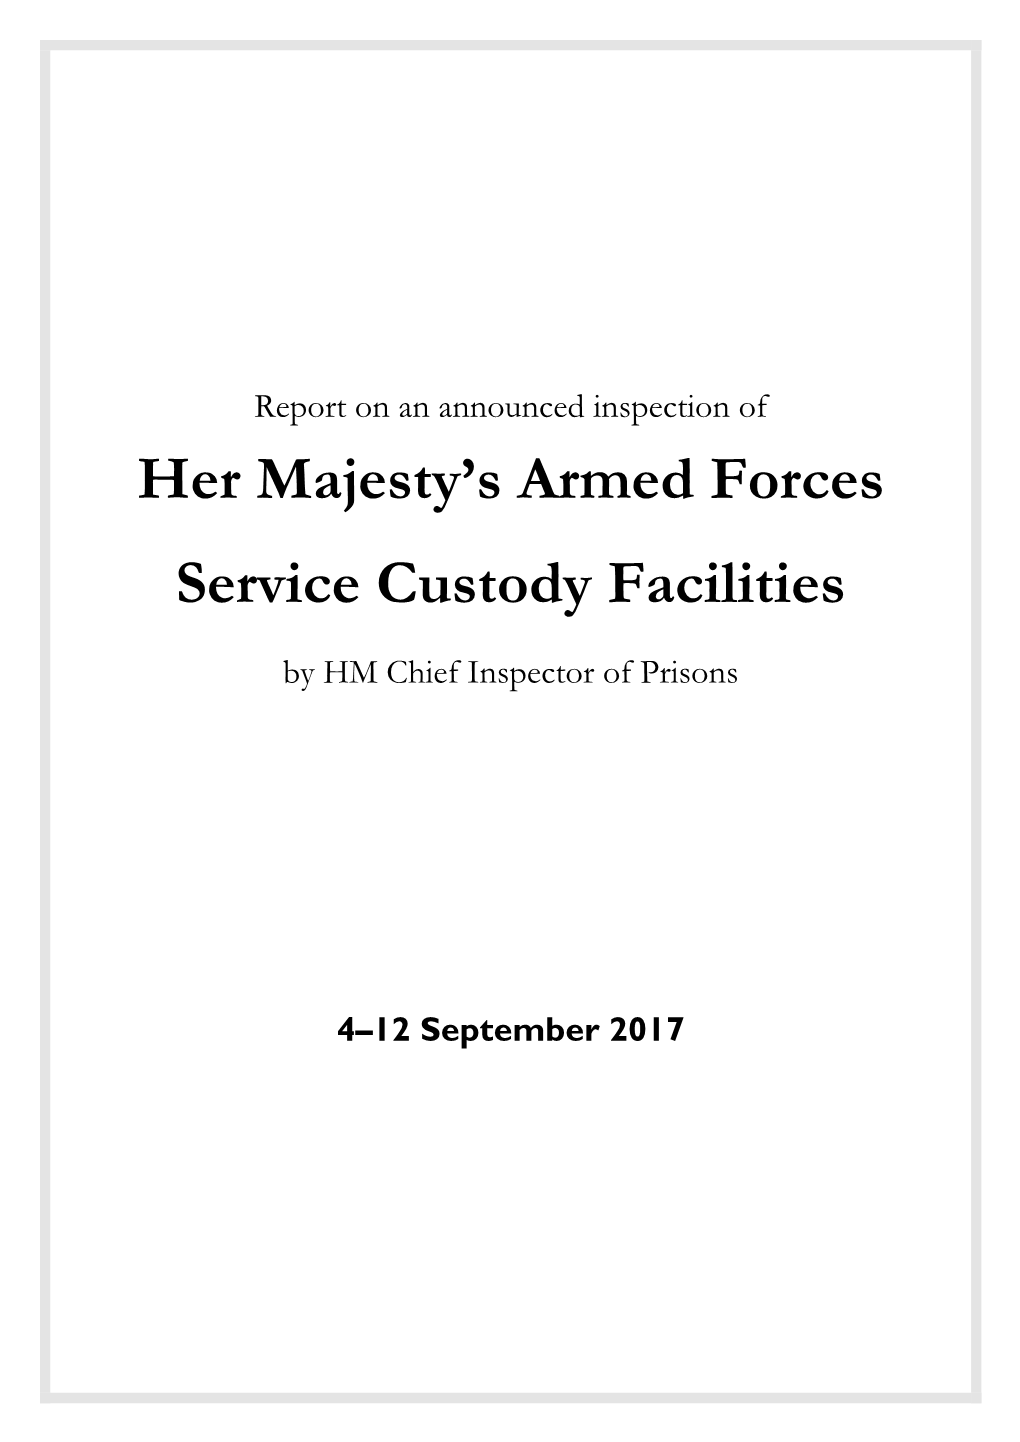 Report on an Announced Inspection of Her Majesty's Armed Forces Service Custody Facilities by HM Chief Inspector of Prisons